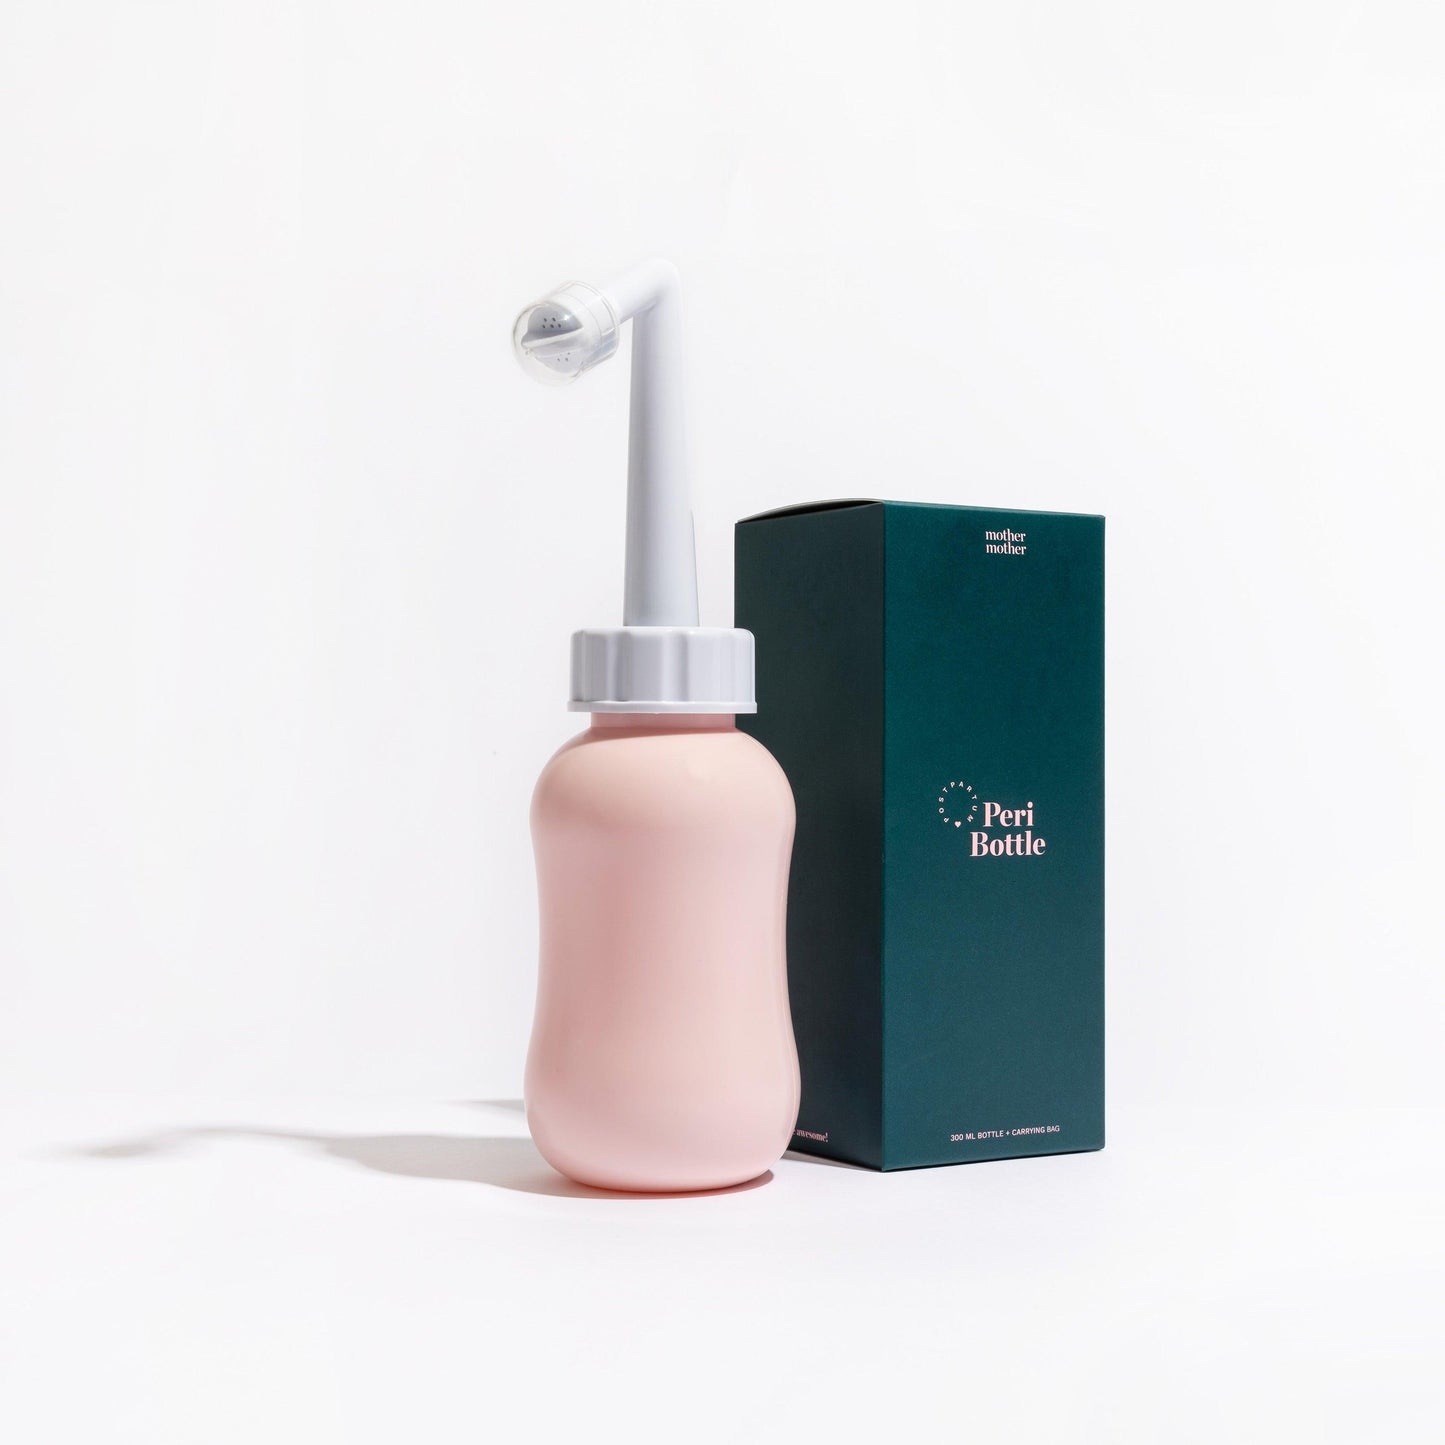 Peri Bottle by Mother Mother